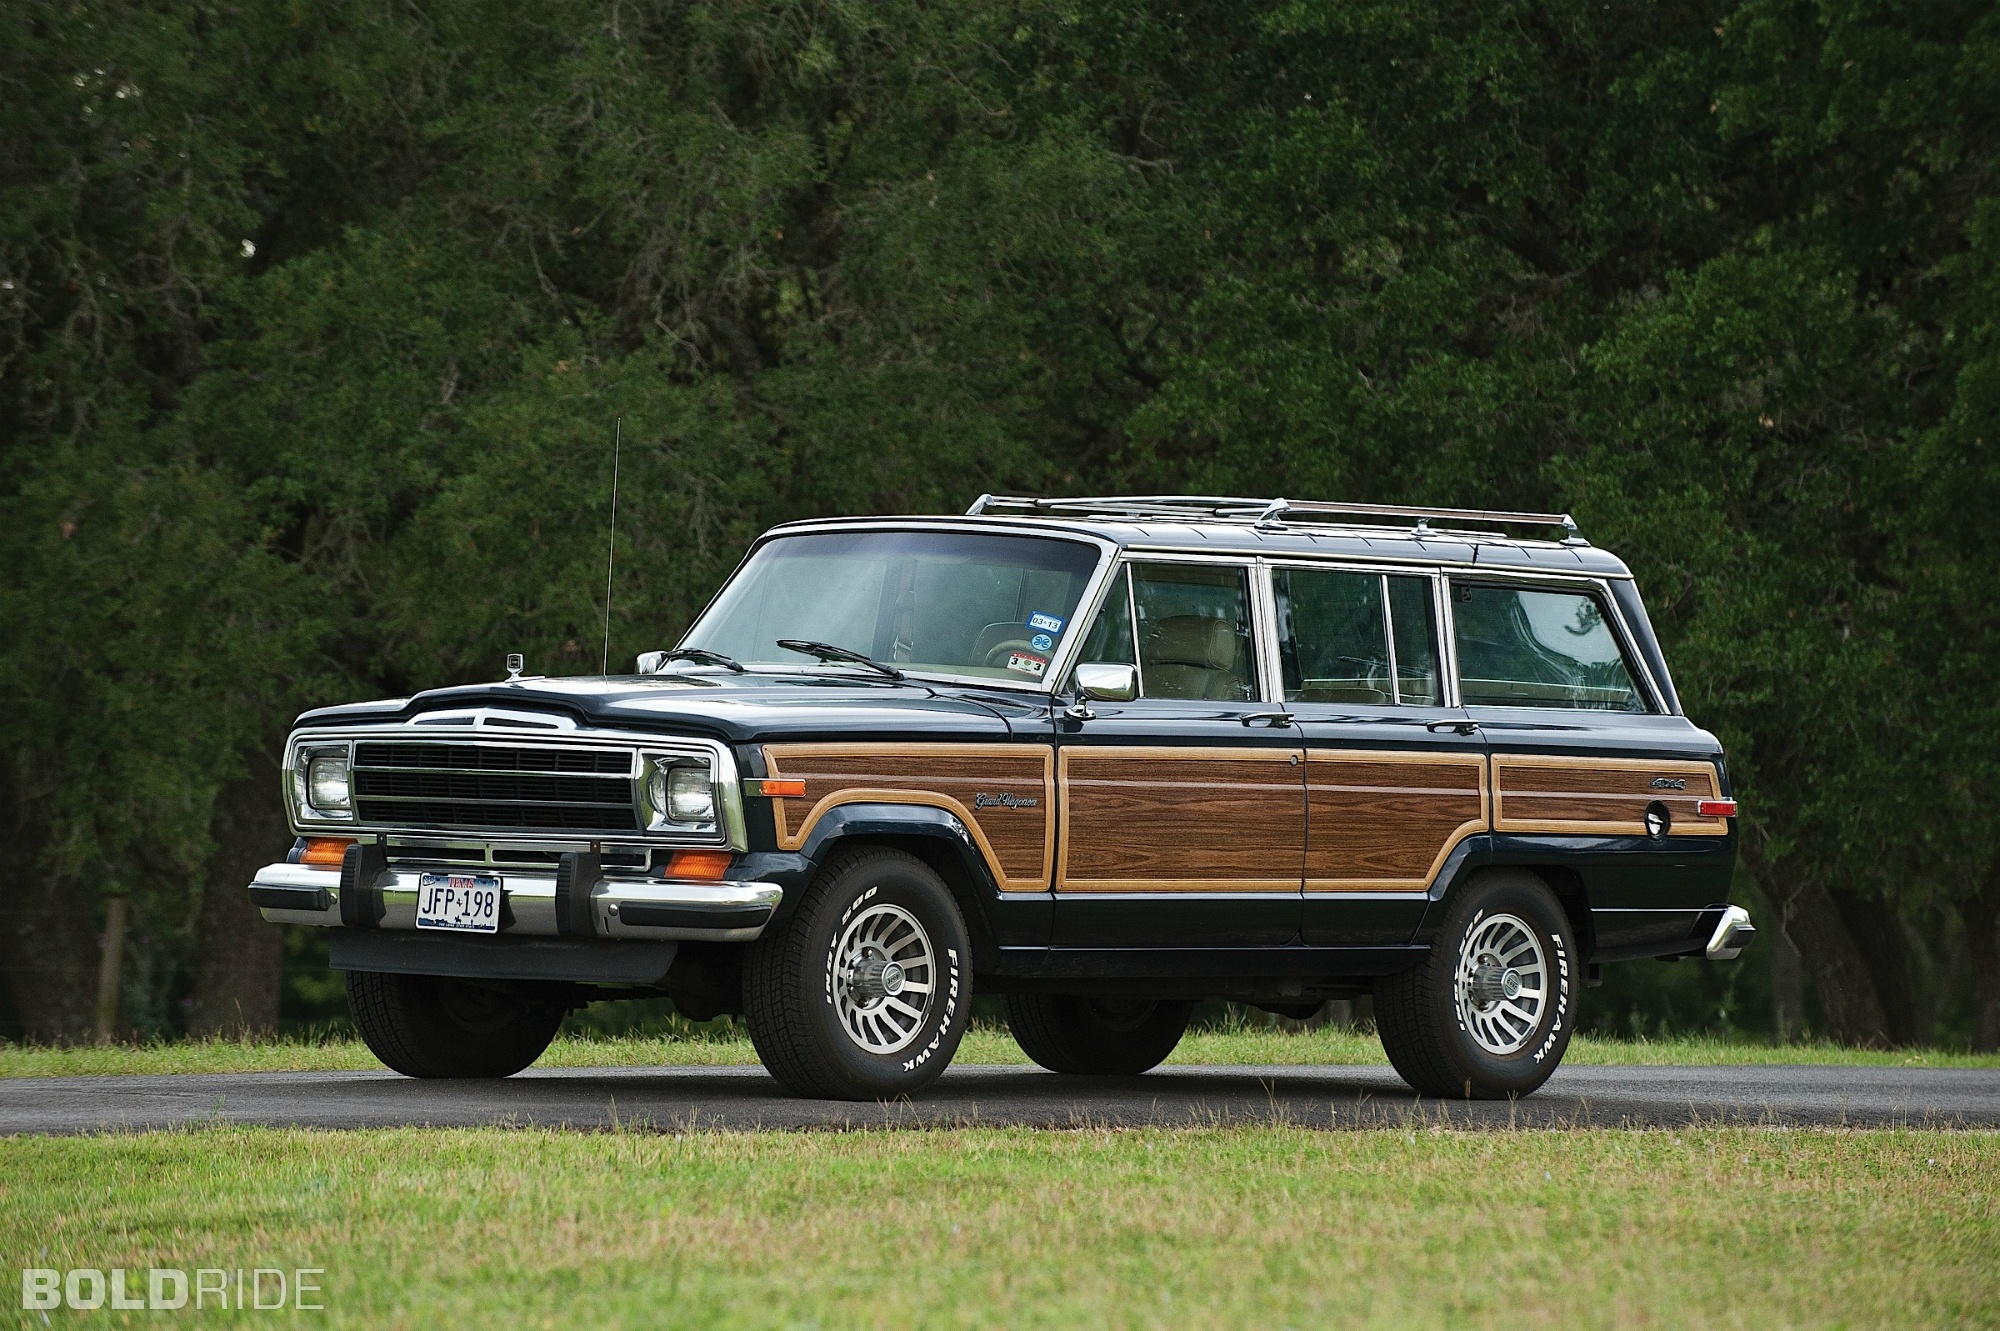 Jeep Wagoneer, Grand and majestic, HD wallpapers, Iconic SUV, 2000x1340 HD Desktop